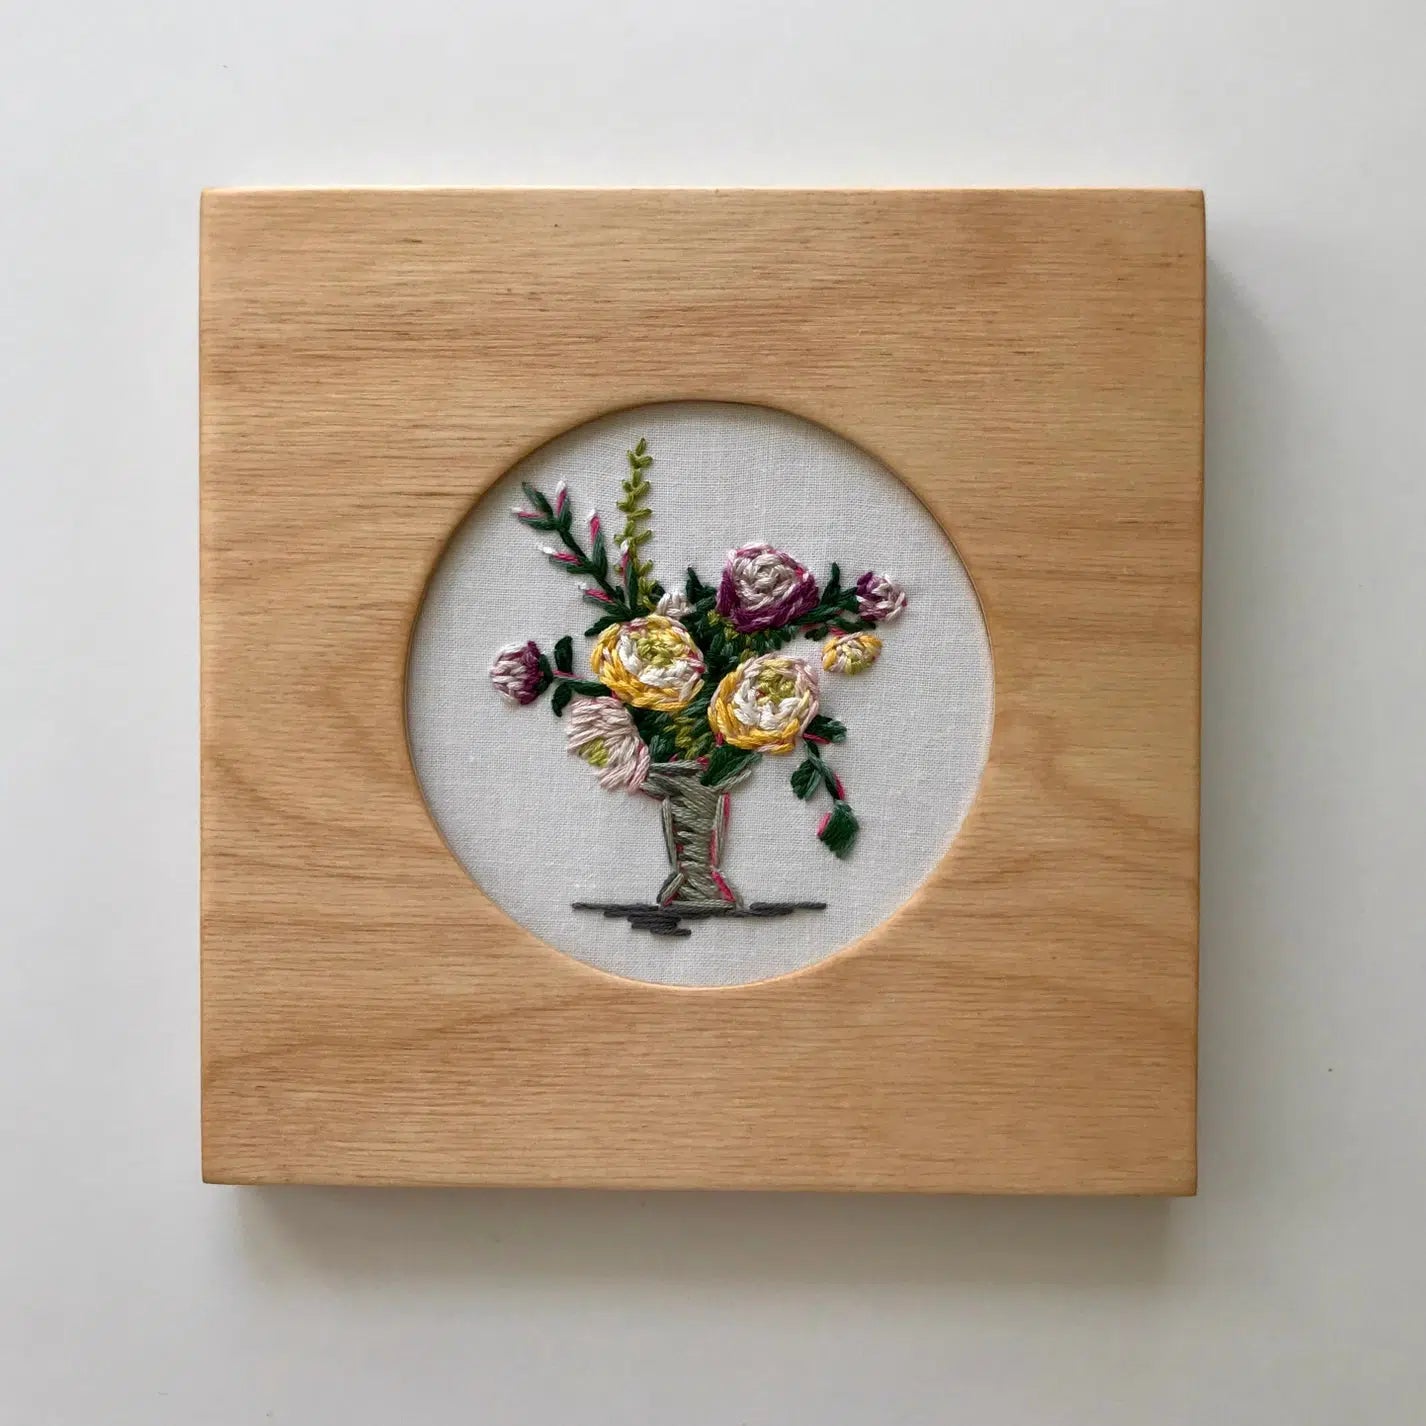 Modern Hoopla-Square Embroidery Hoop Art Frame - 4" Hoops-embroidery notion-gather here online